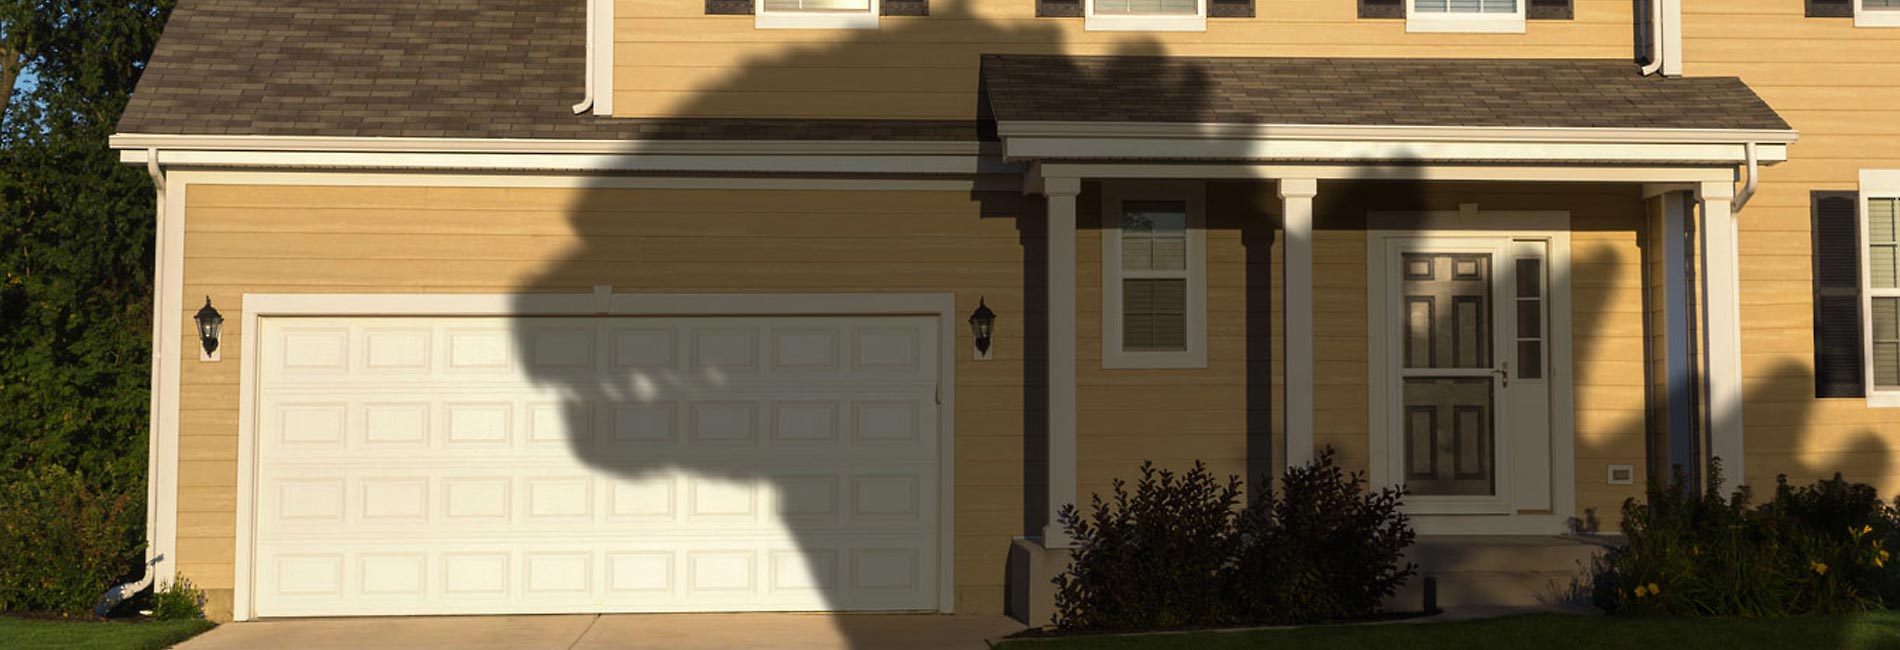 shadow on a home